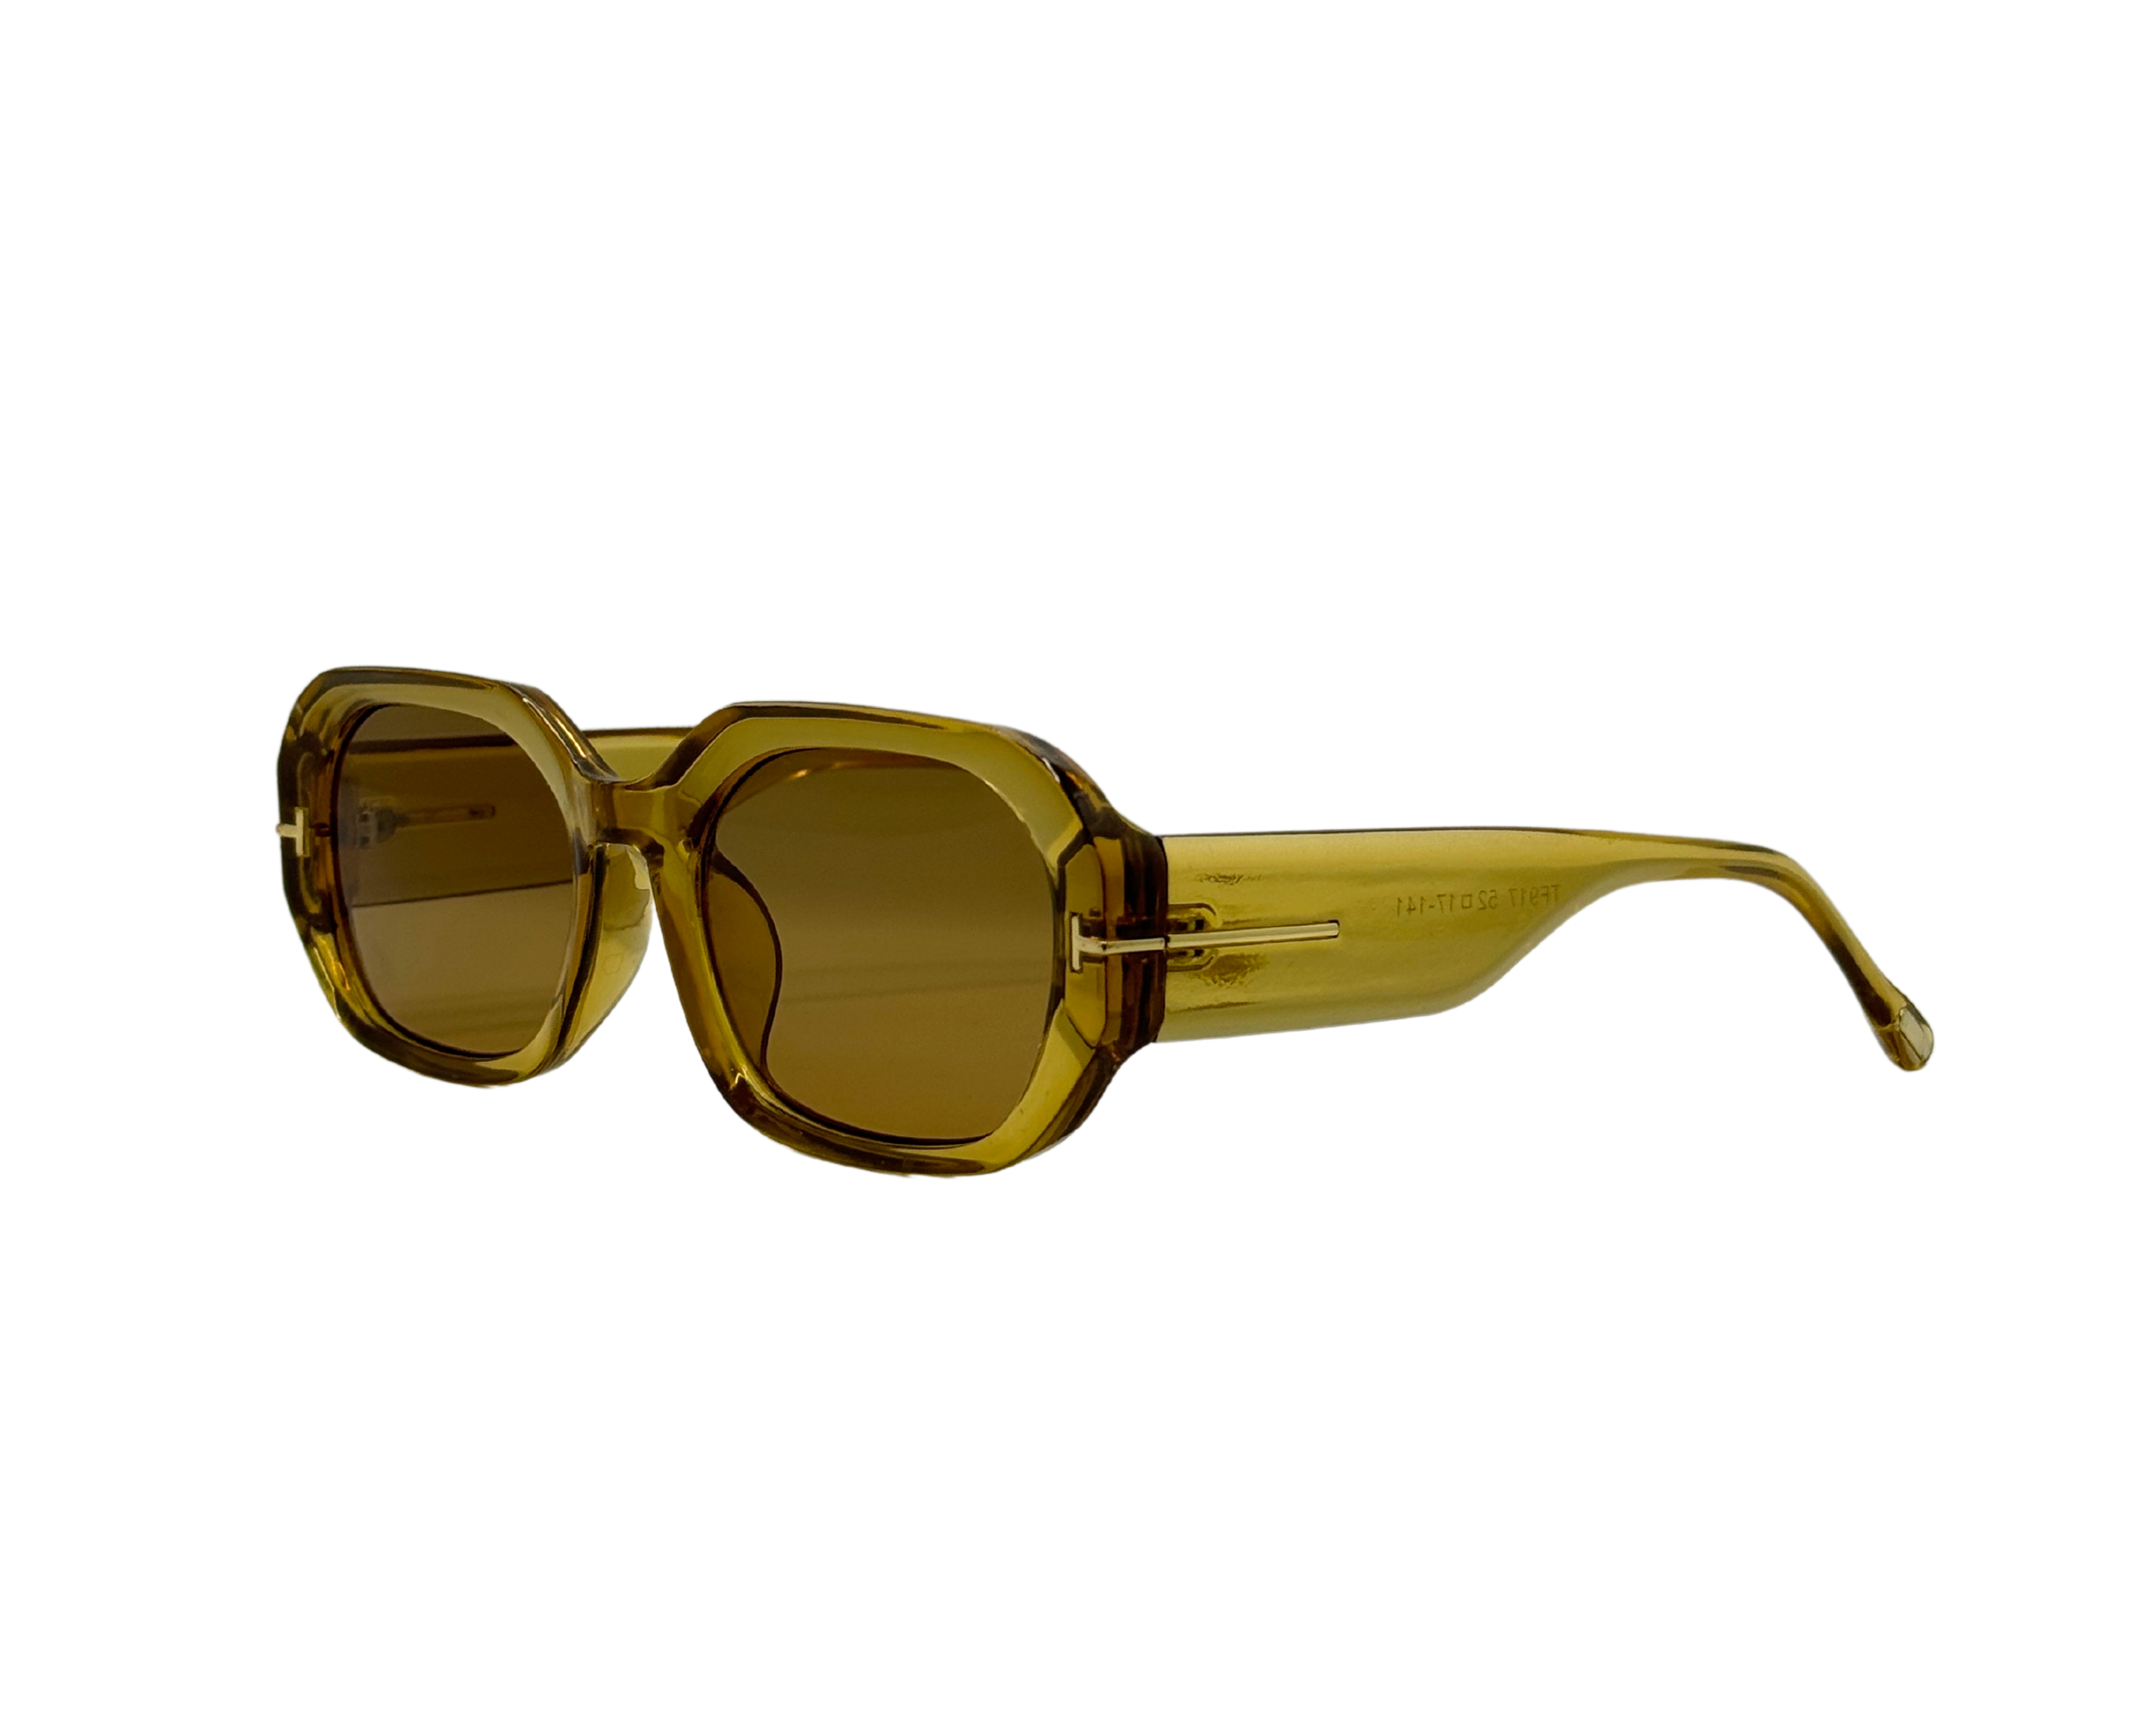 NS Deluxe - 917 - Light Brown - Sunglasses